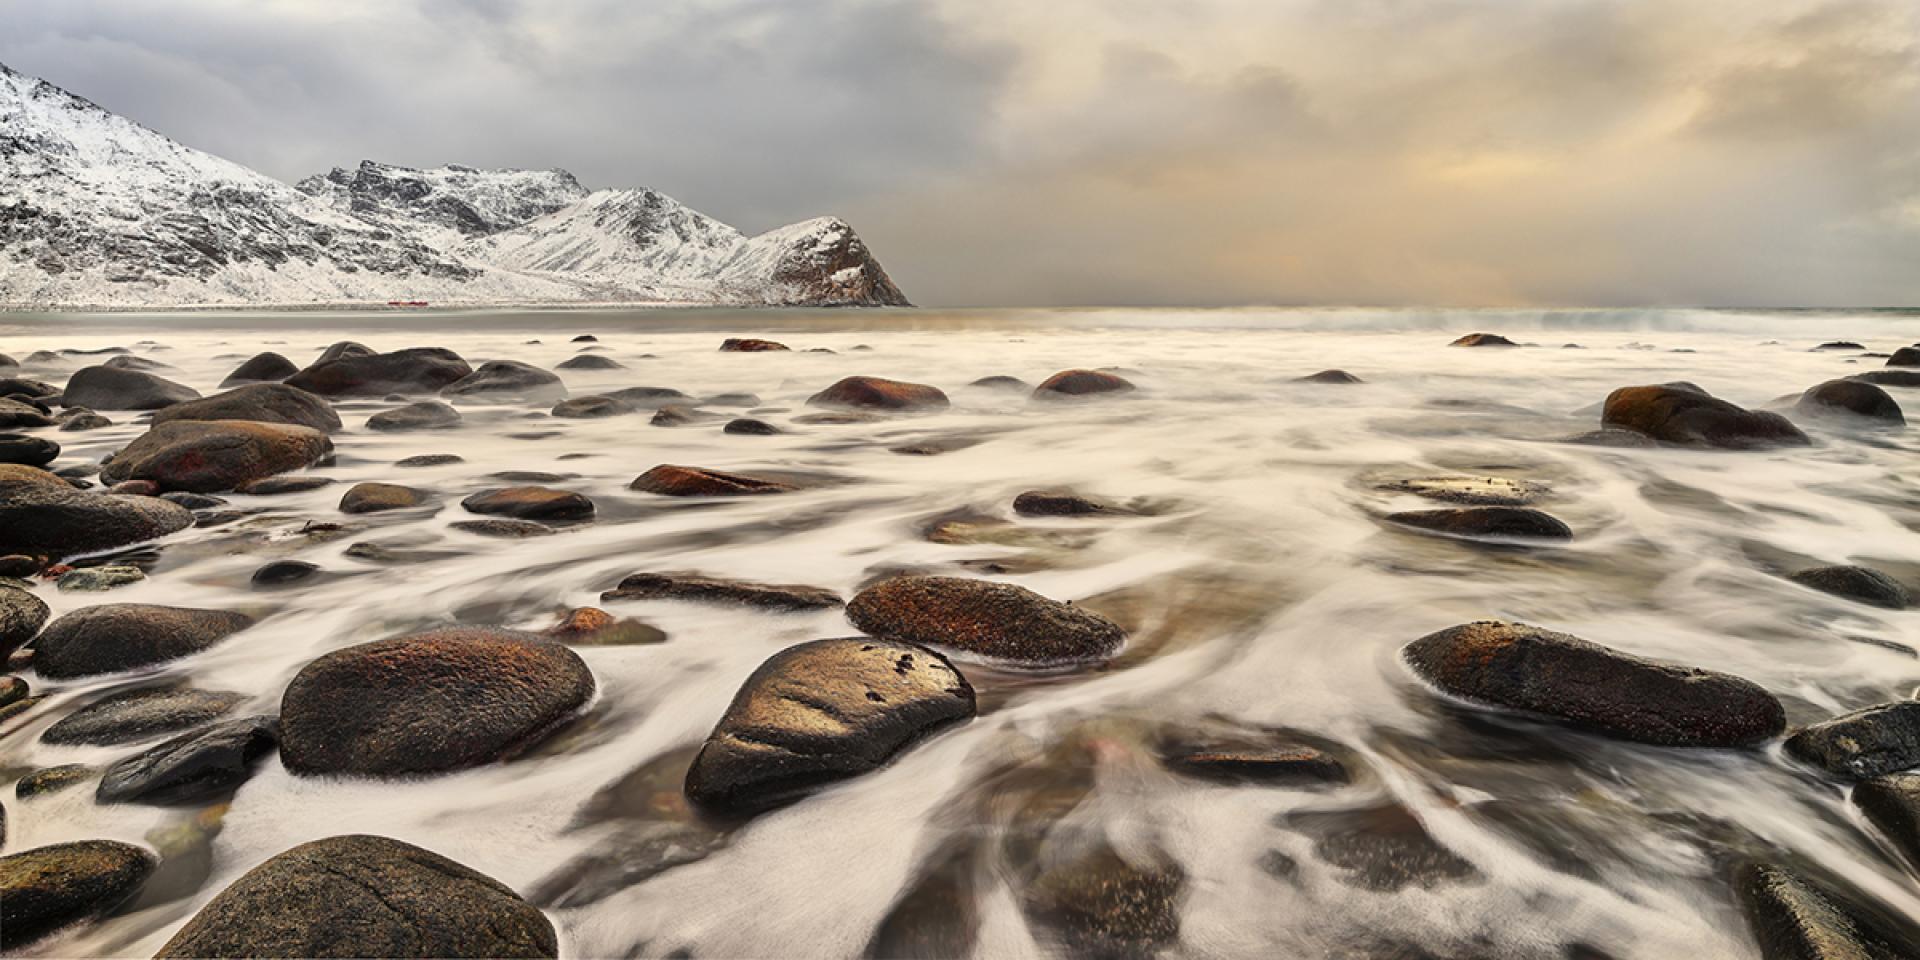 London Photography Awards Winner - Surf's Up Norway